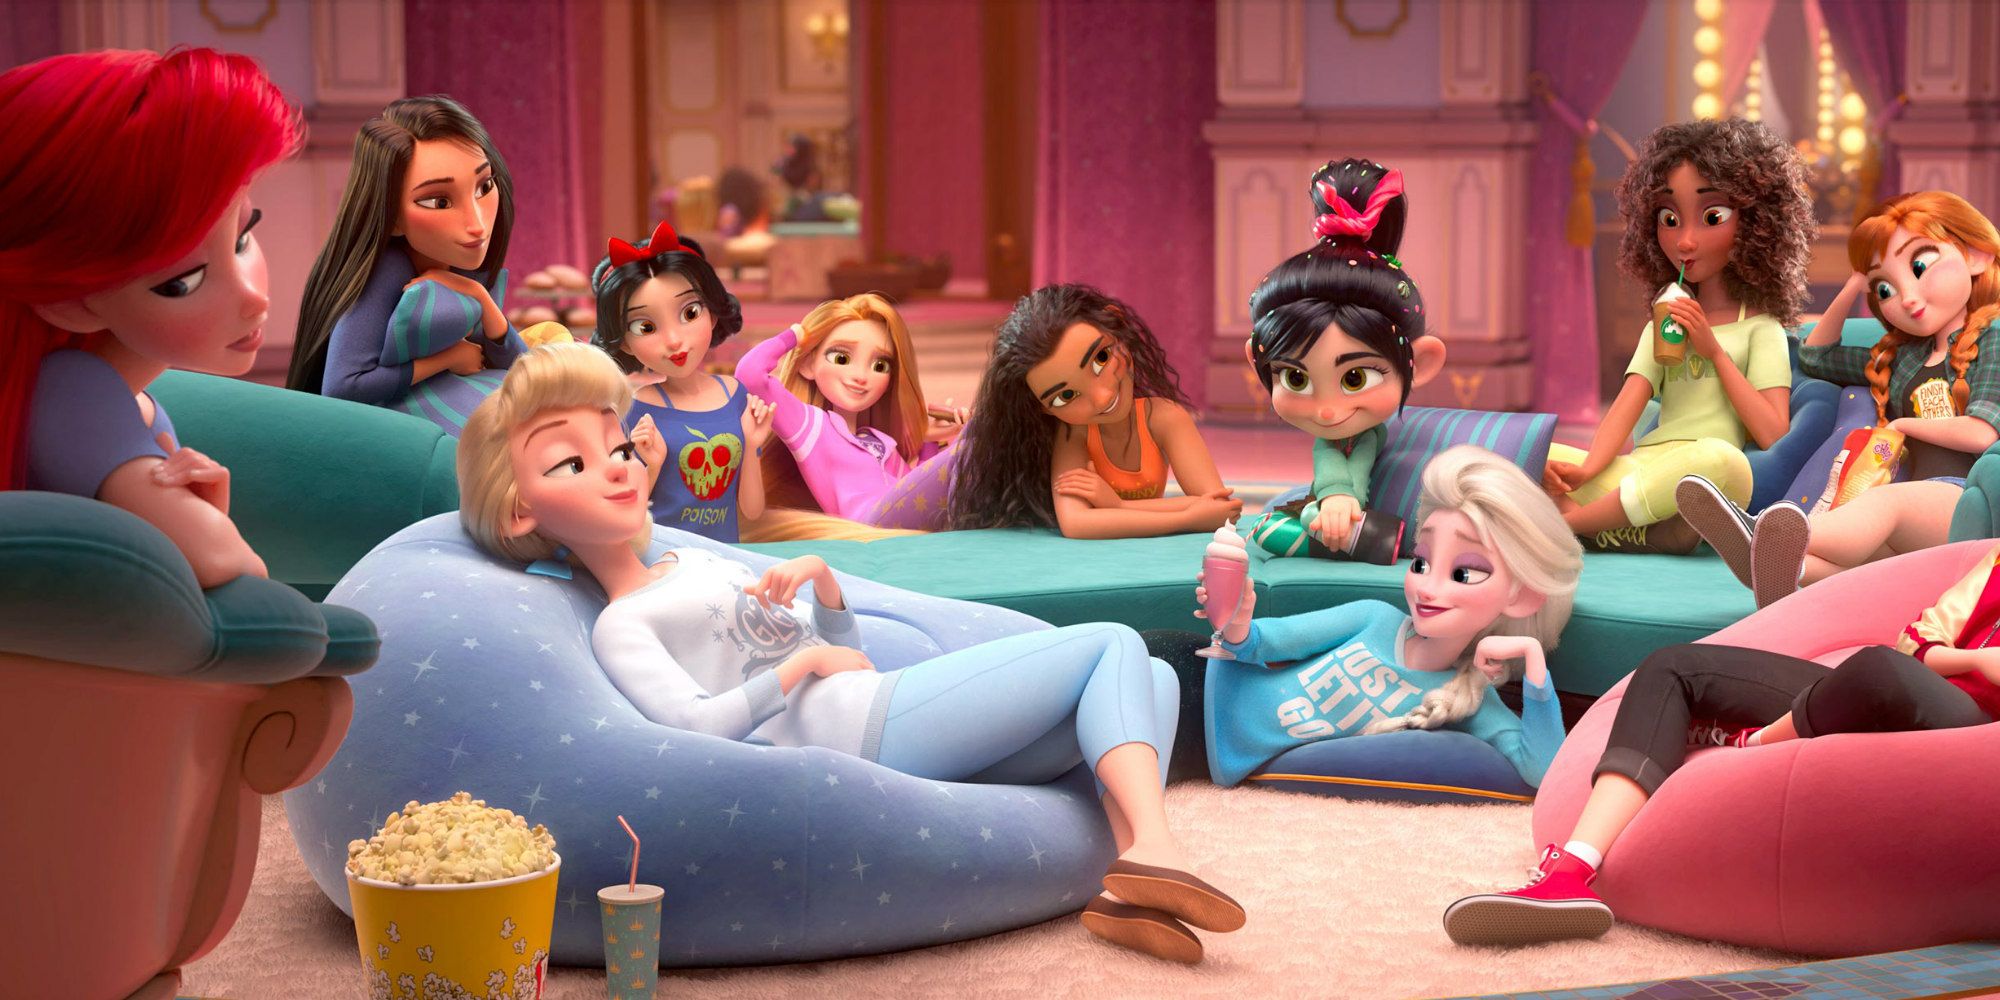 Image result for wreck it ralph 2 images